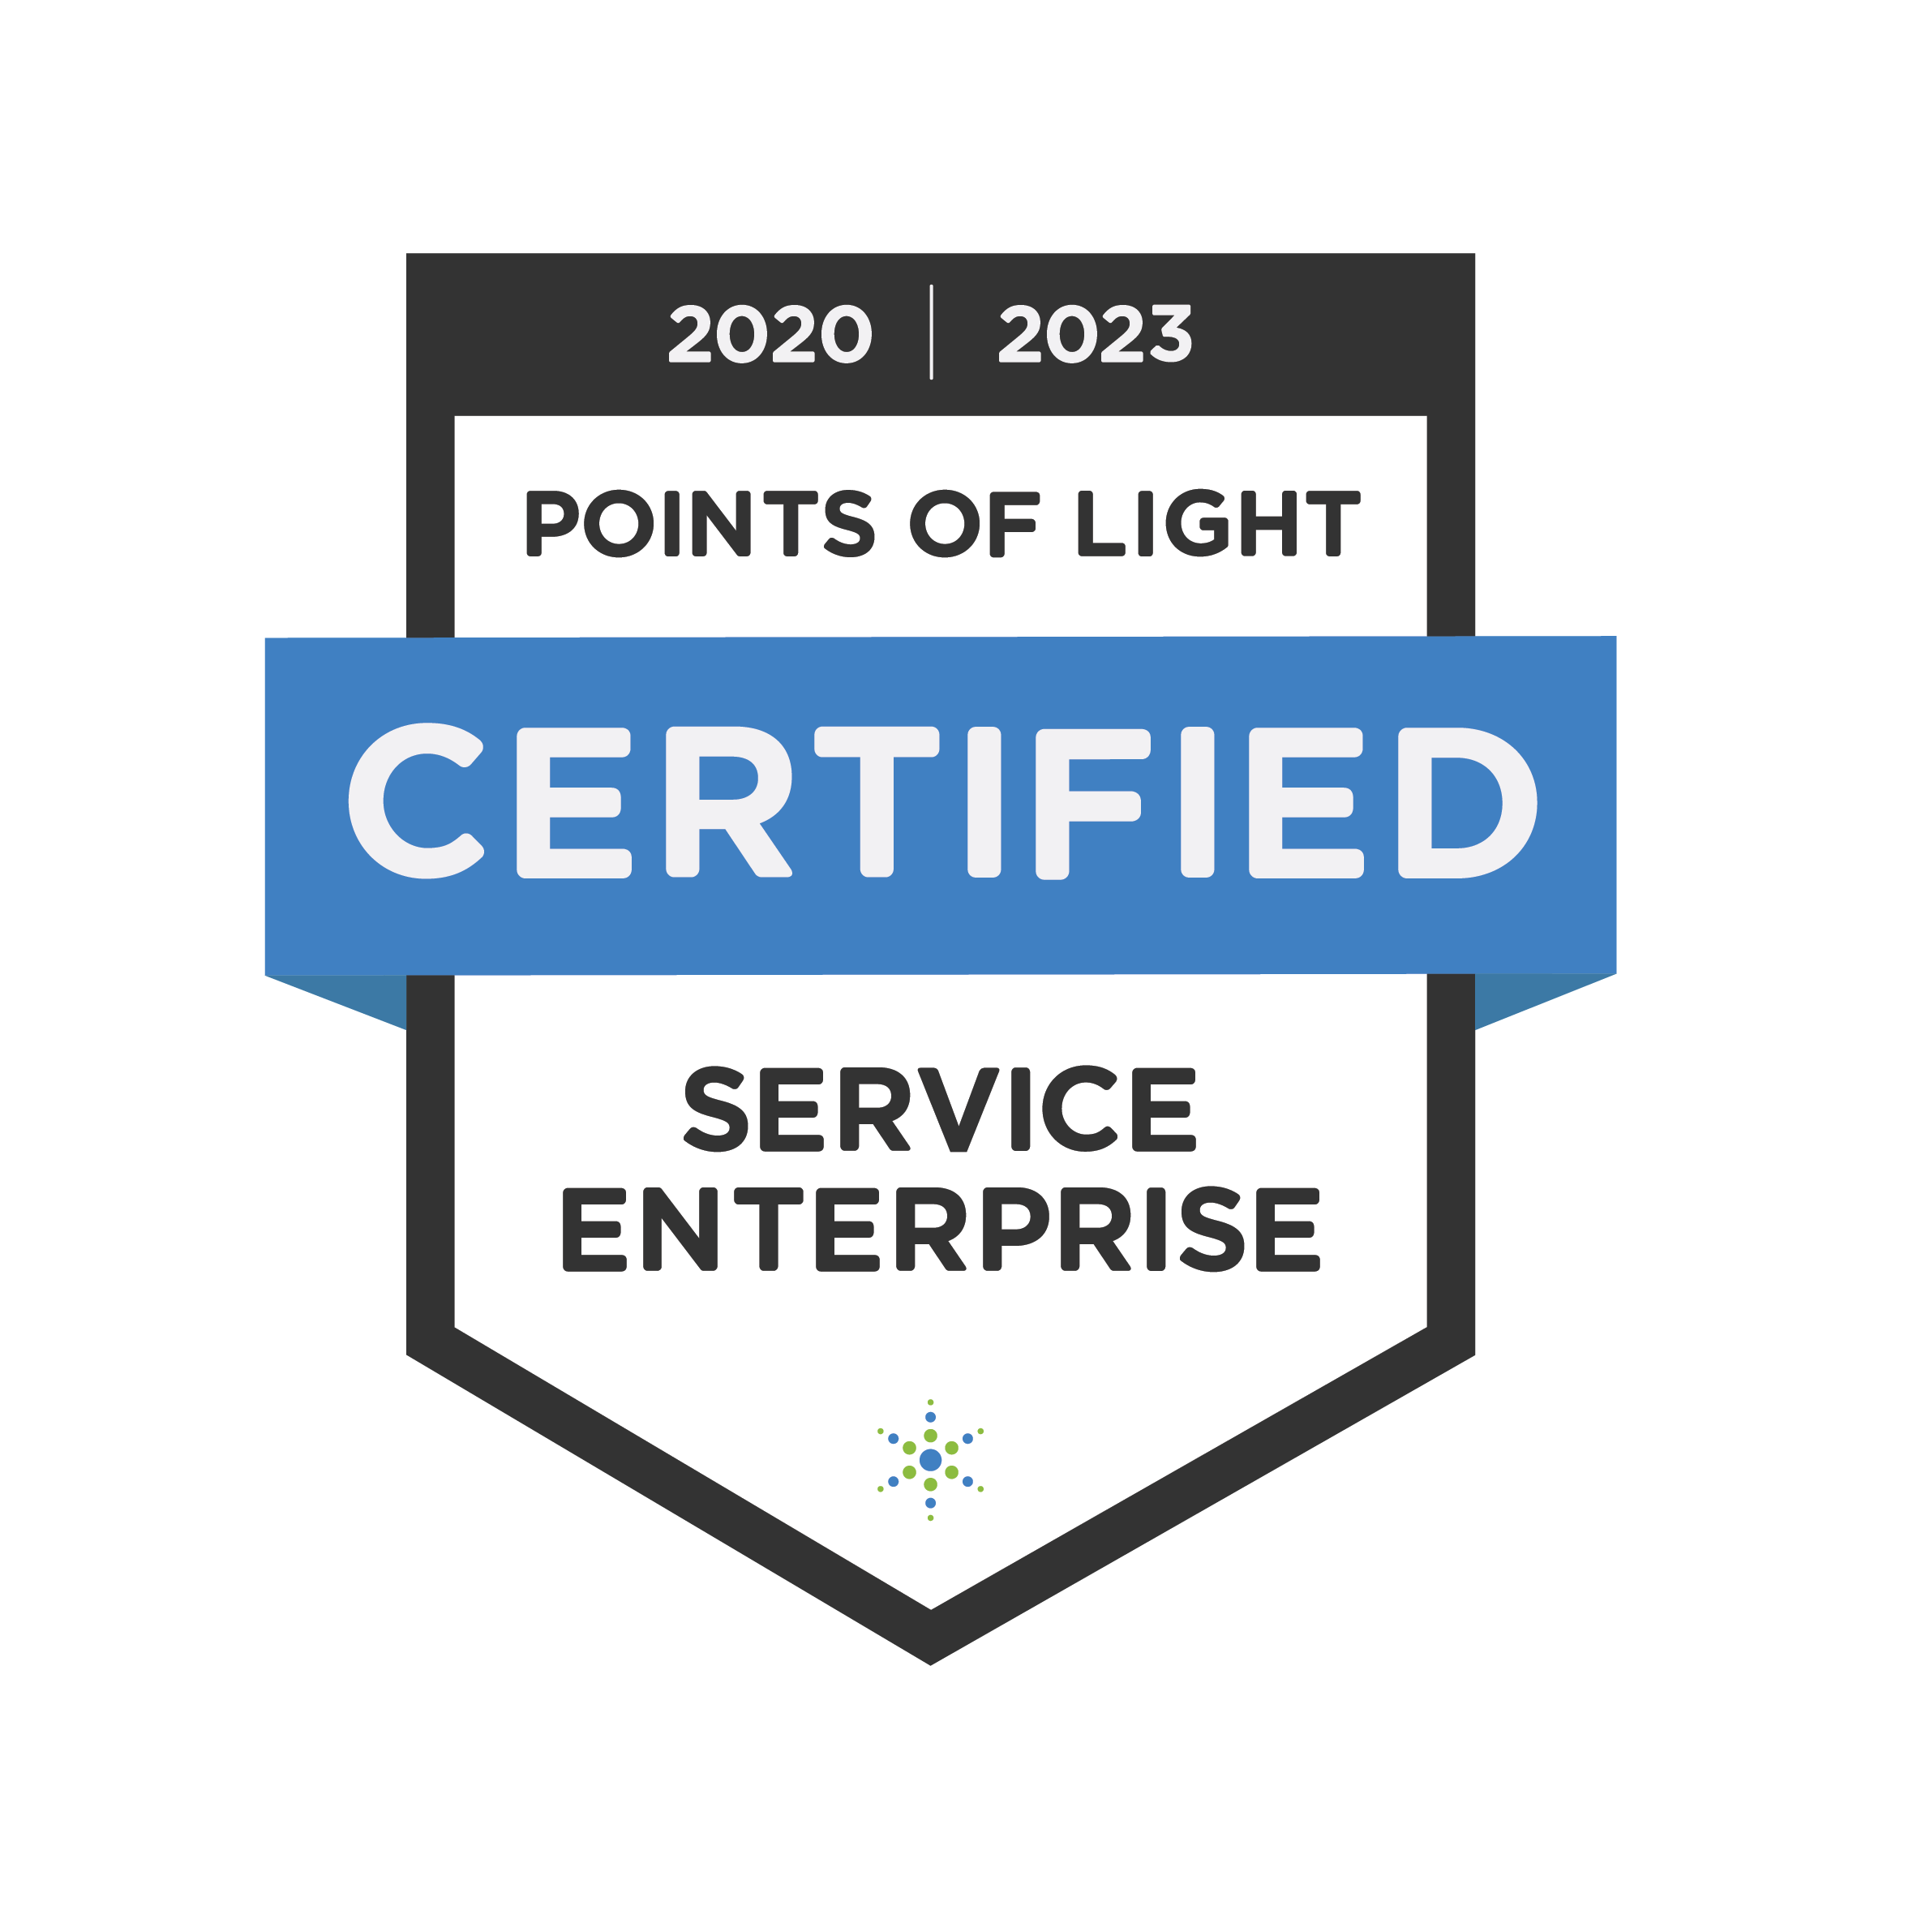 https://www.thecaryingplace.org/wp-content/uploads/2023/02/Service-Enterprise-2020-Certification-Seal.png